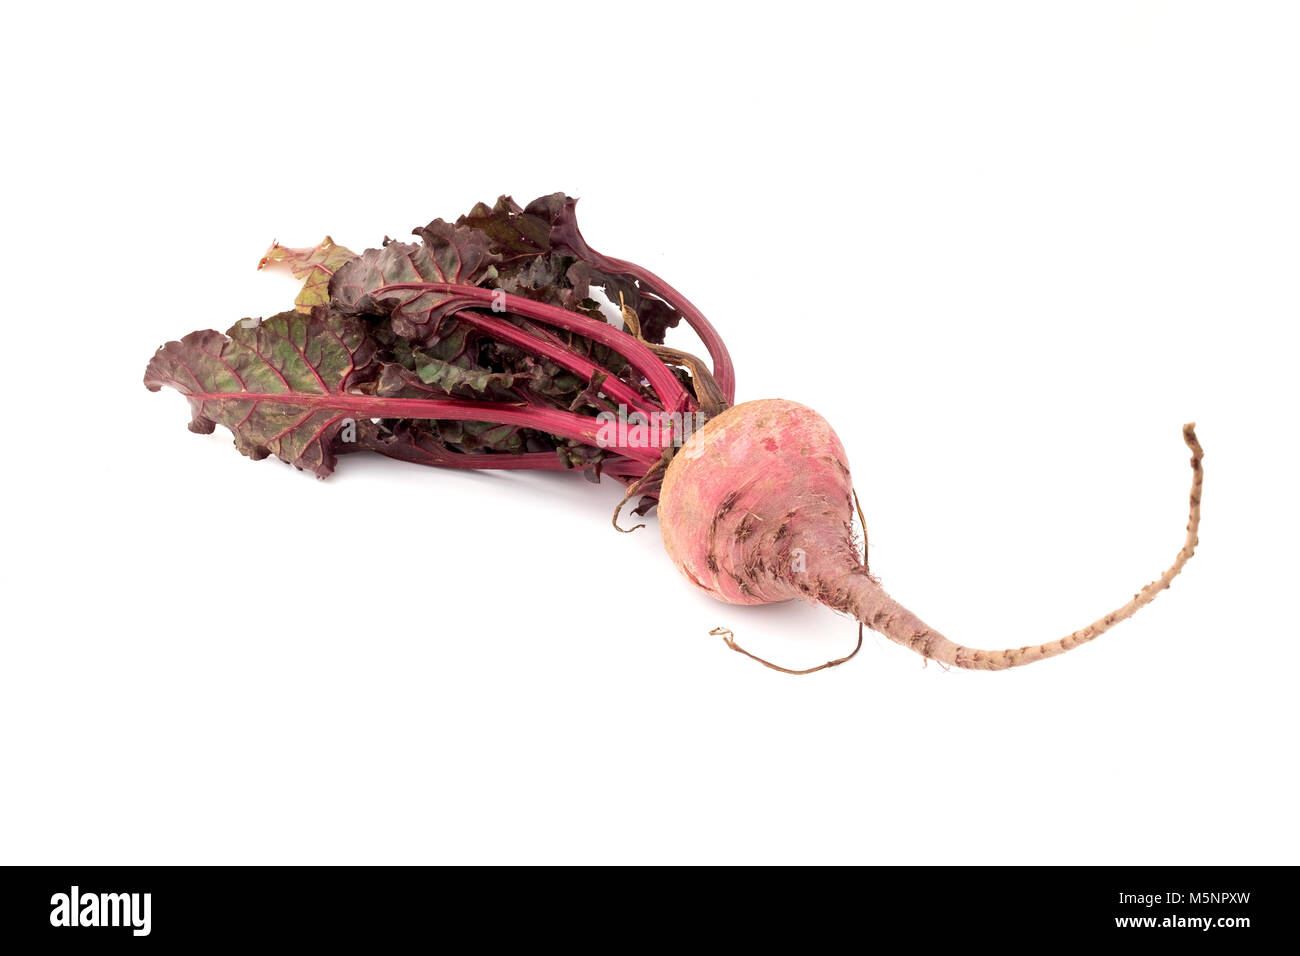 Beetroot on a white background Stock Photo